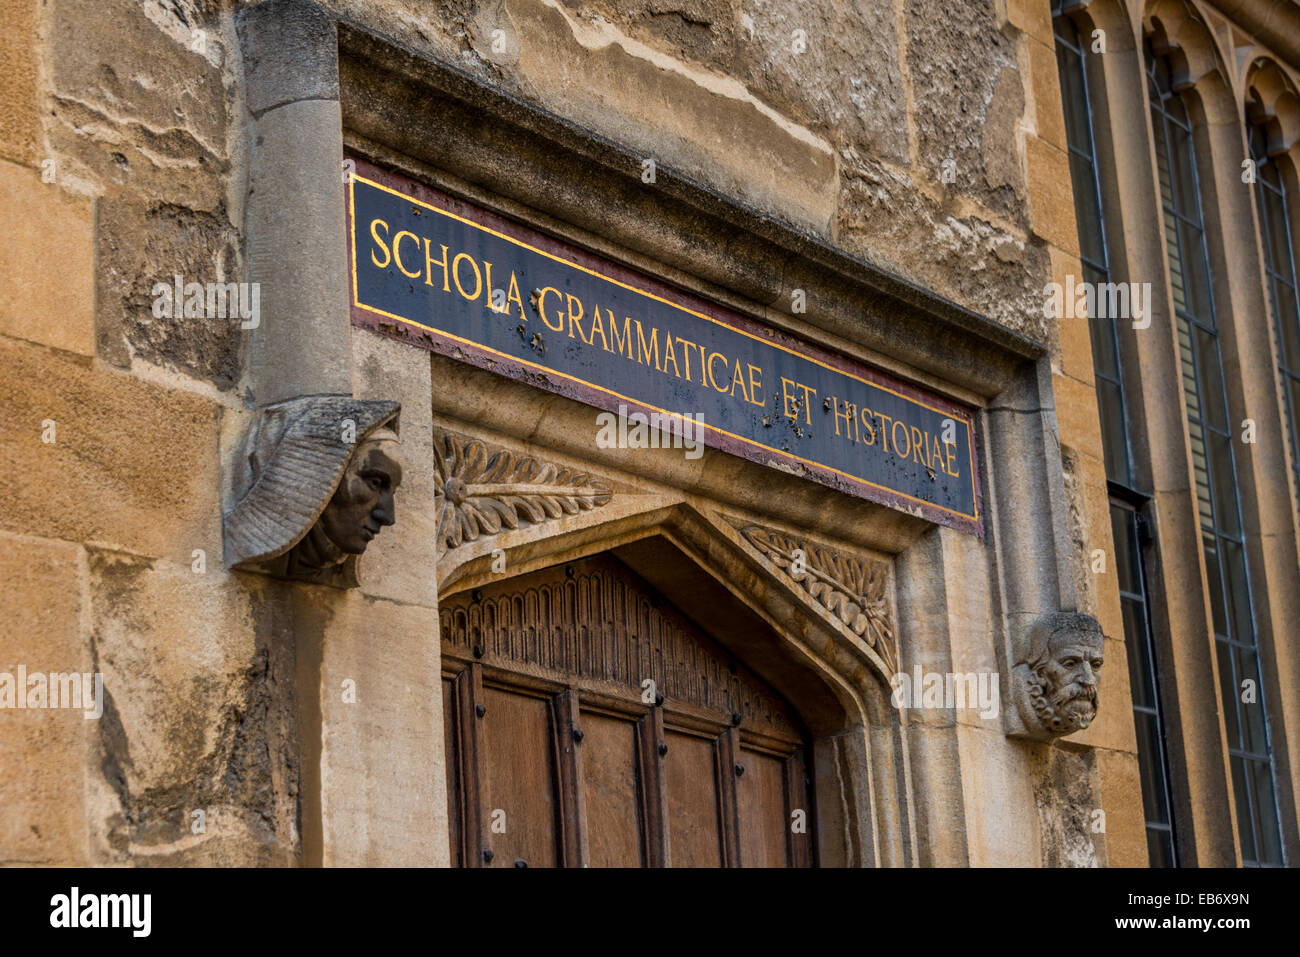 Doorway in the Old Schools Quadrangle of the Bodleian Library for Schola Grammaticae et Historiae - Grammar and History Stock Photo